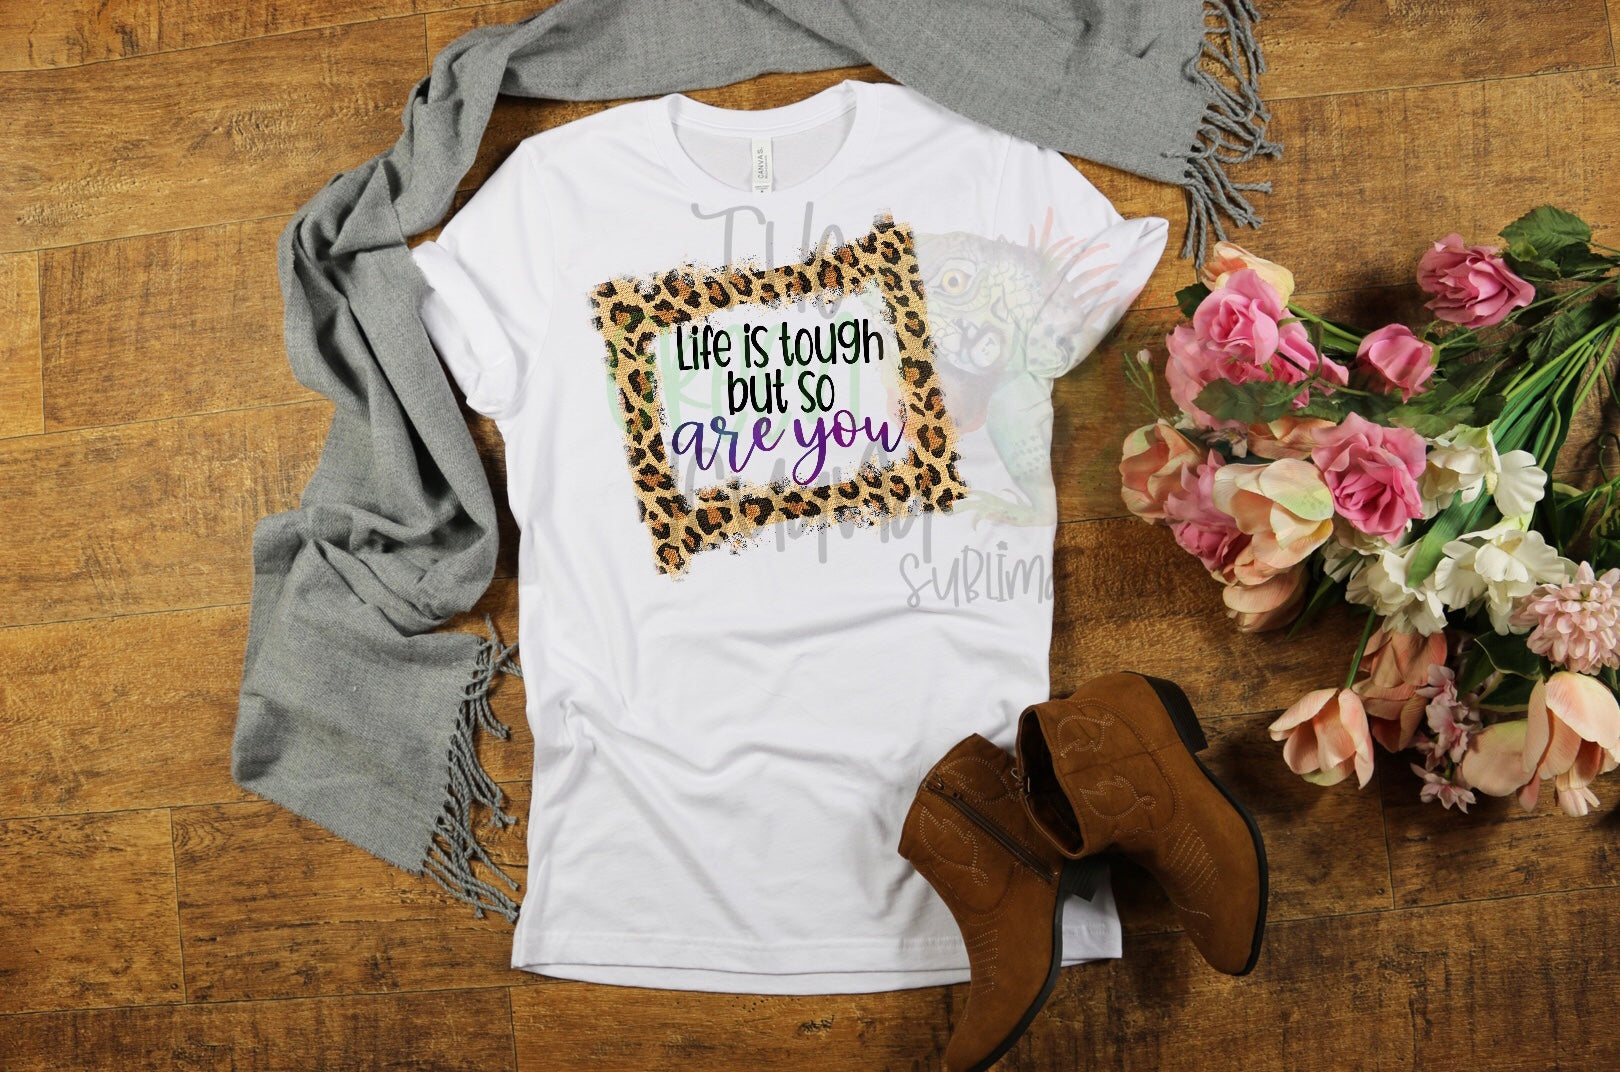 Life is tough but so are you (leopard frame)